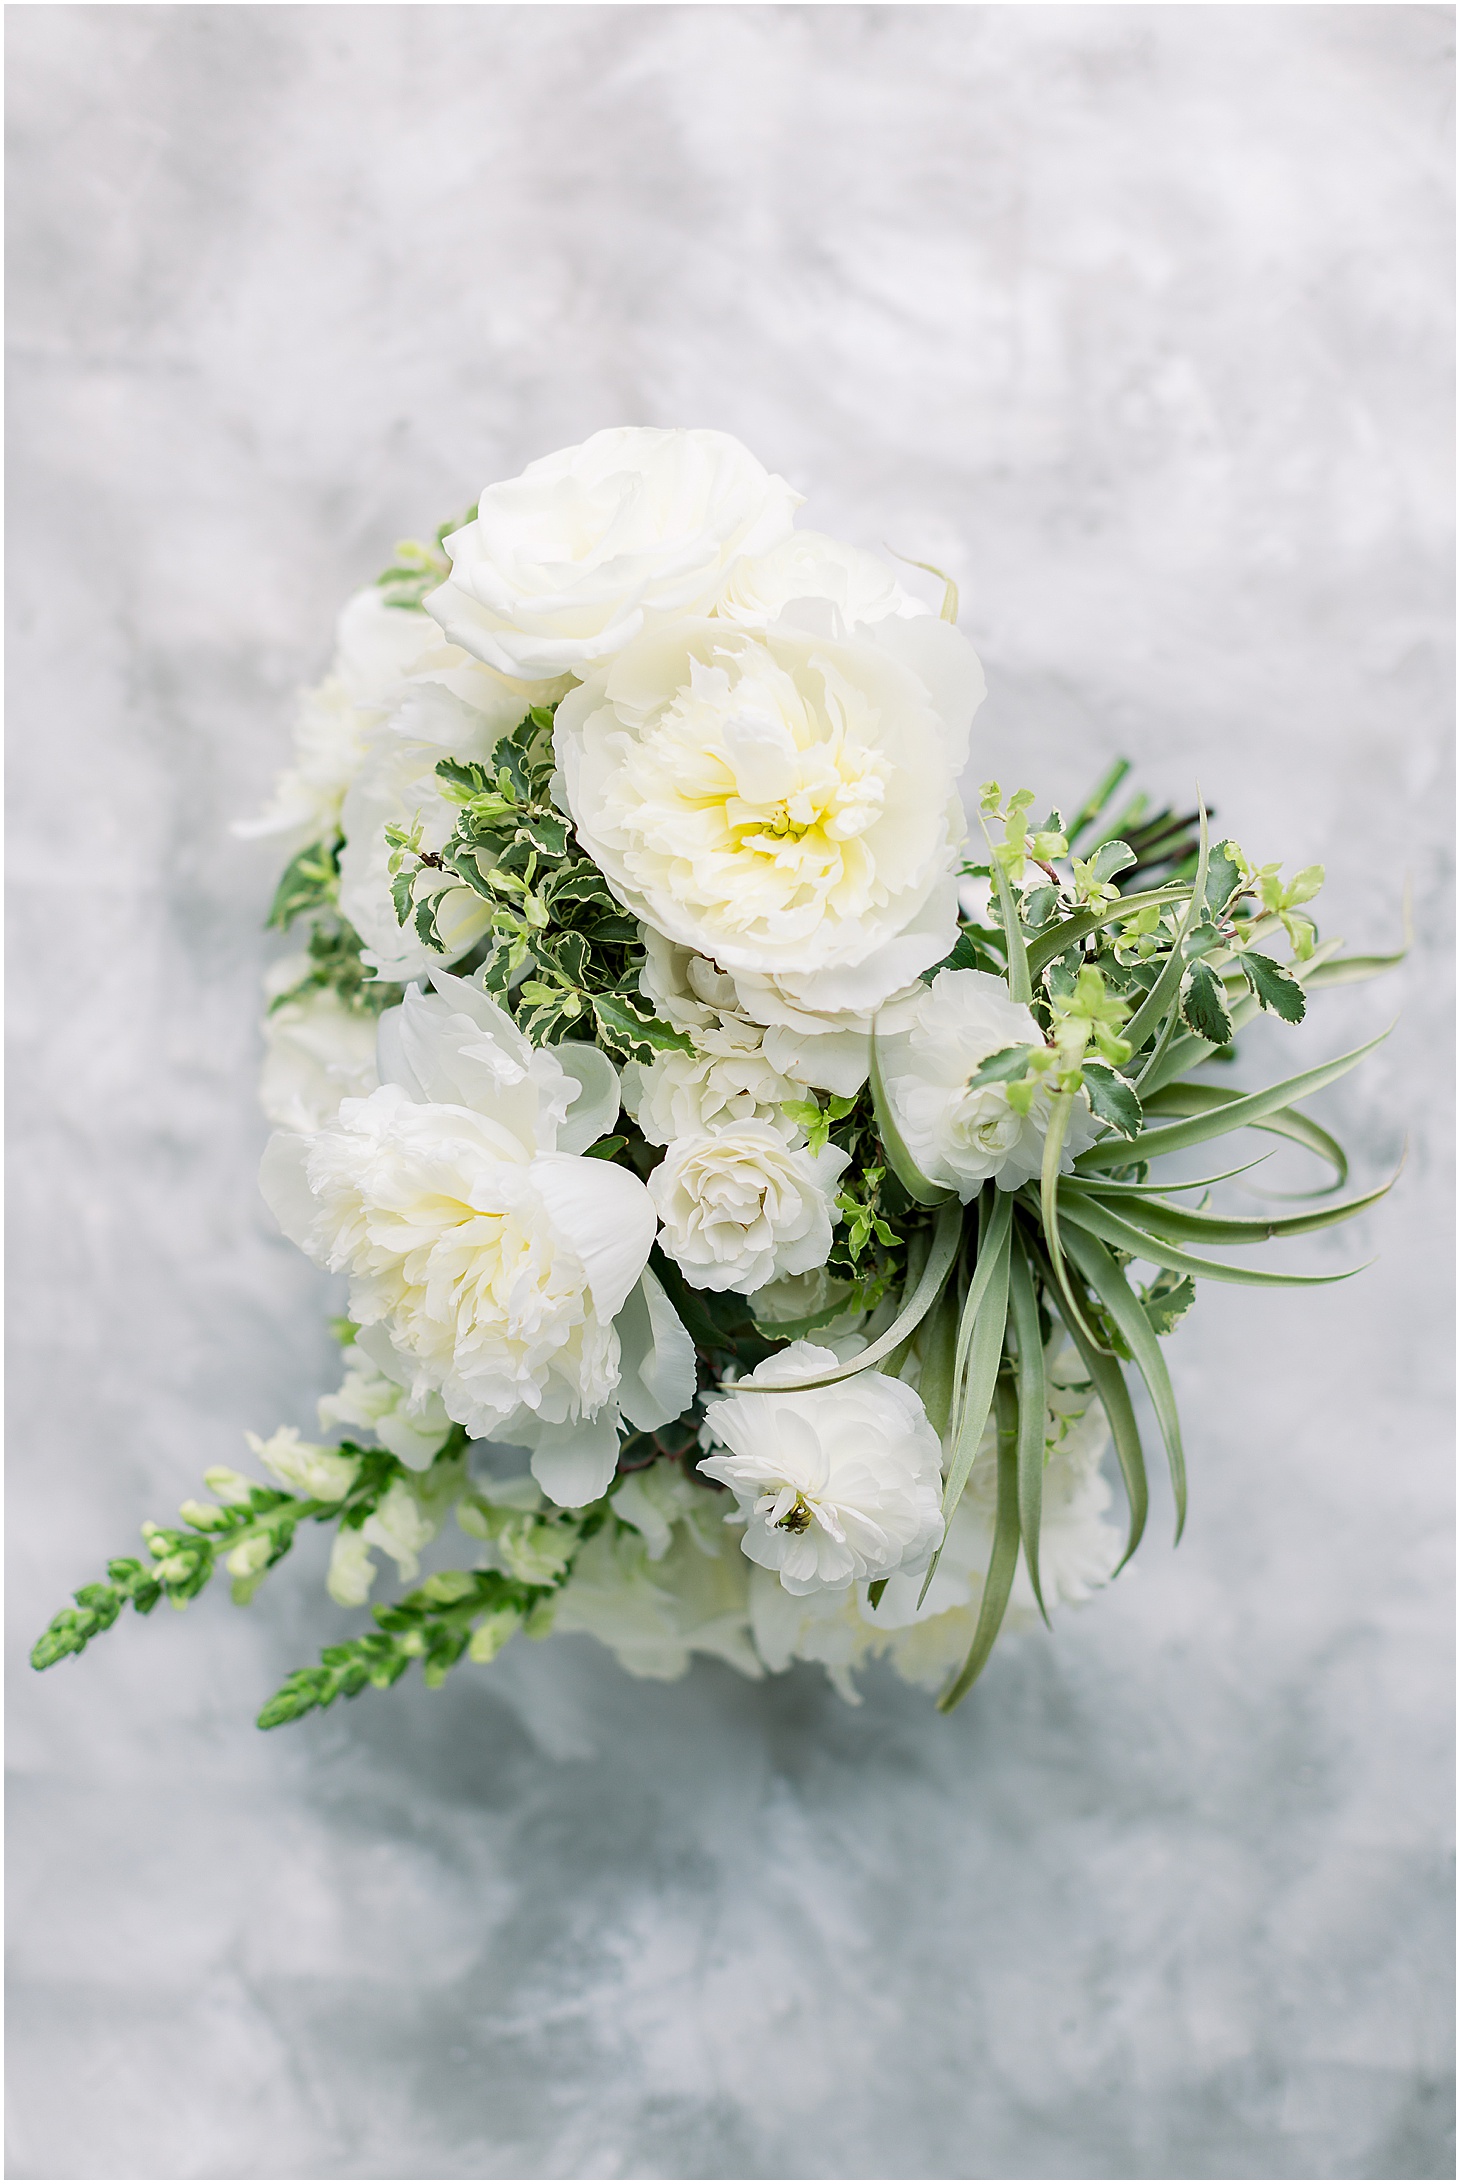 Sweet Root Village Bridal Bouquet, Bridal Details at Inter-Continental Hotel at Navy Yards in DC, Modern Textural Spring Wedding at District Winery, Sarah Bradshaw Photography, DC Wedding Photographer